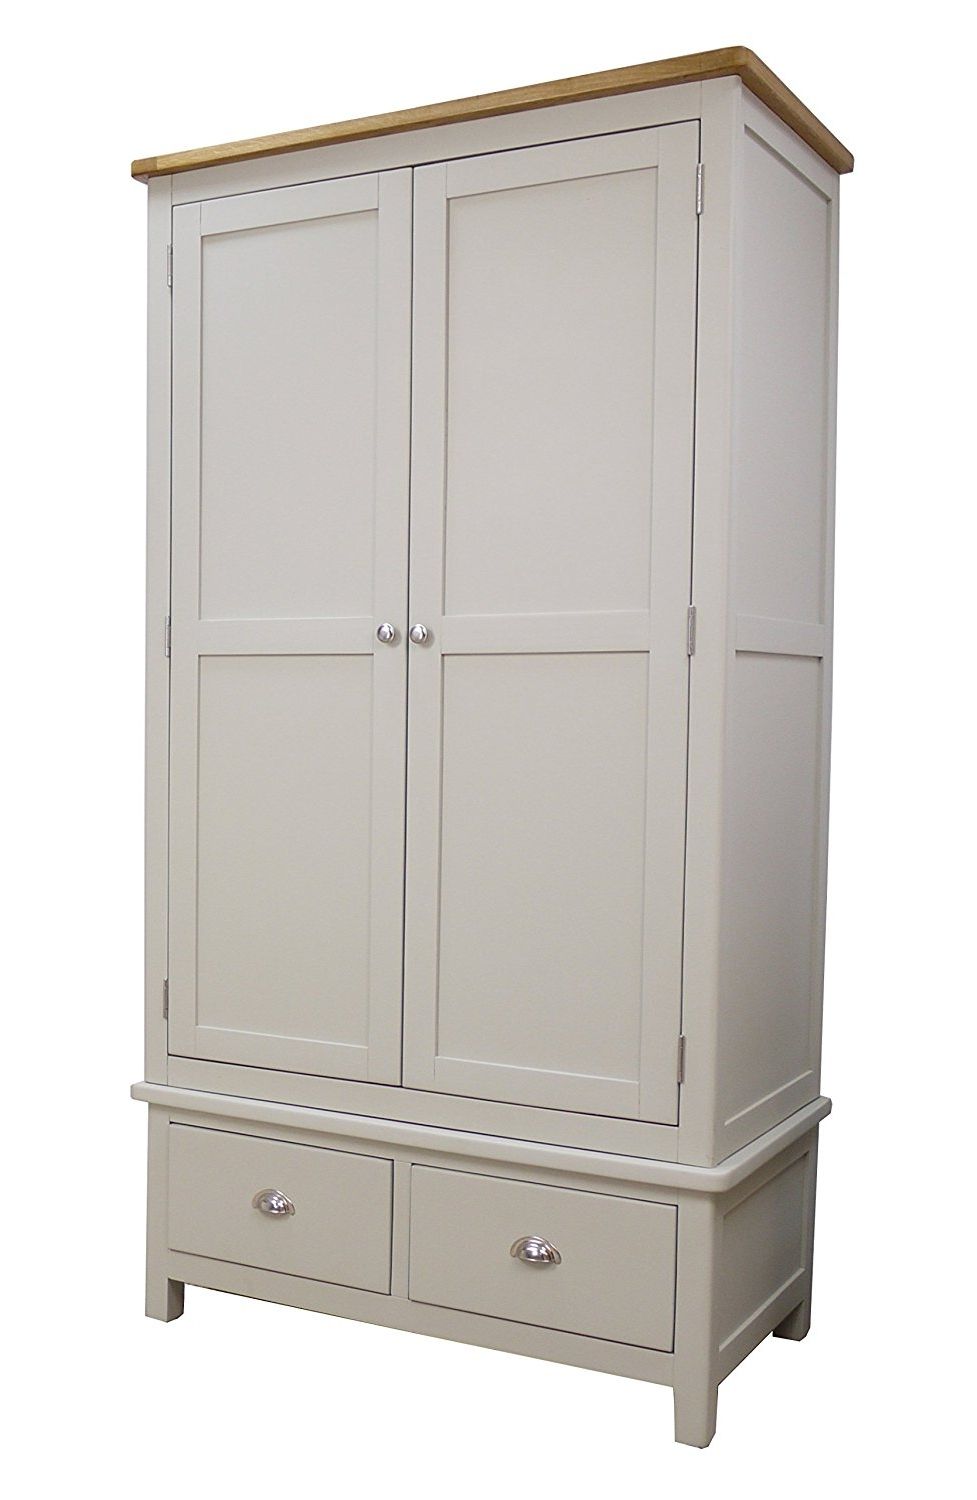 Cheap Wardrobes With Drawers For Preferred Solid Wood Wardrobes Cheap Sliding Wardrobe Doors Armoire You Must (View 9 of 15)